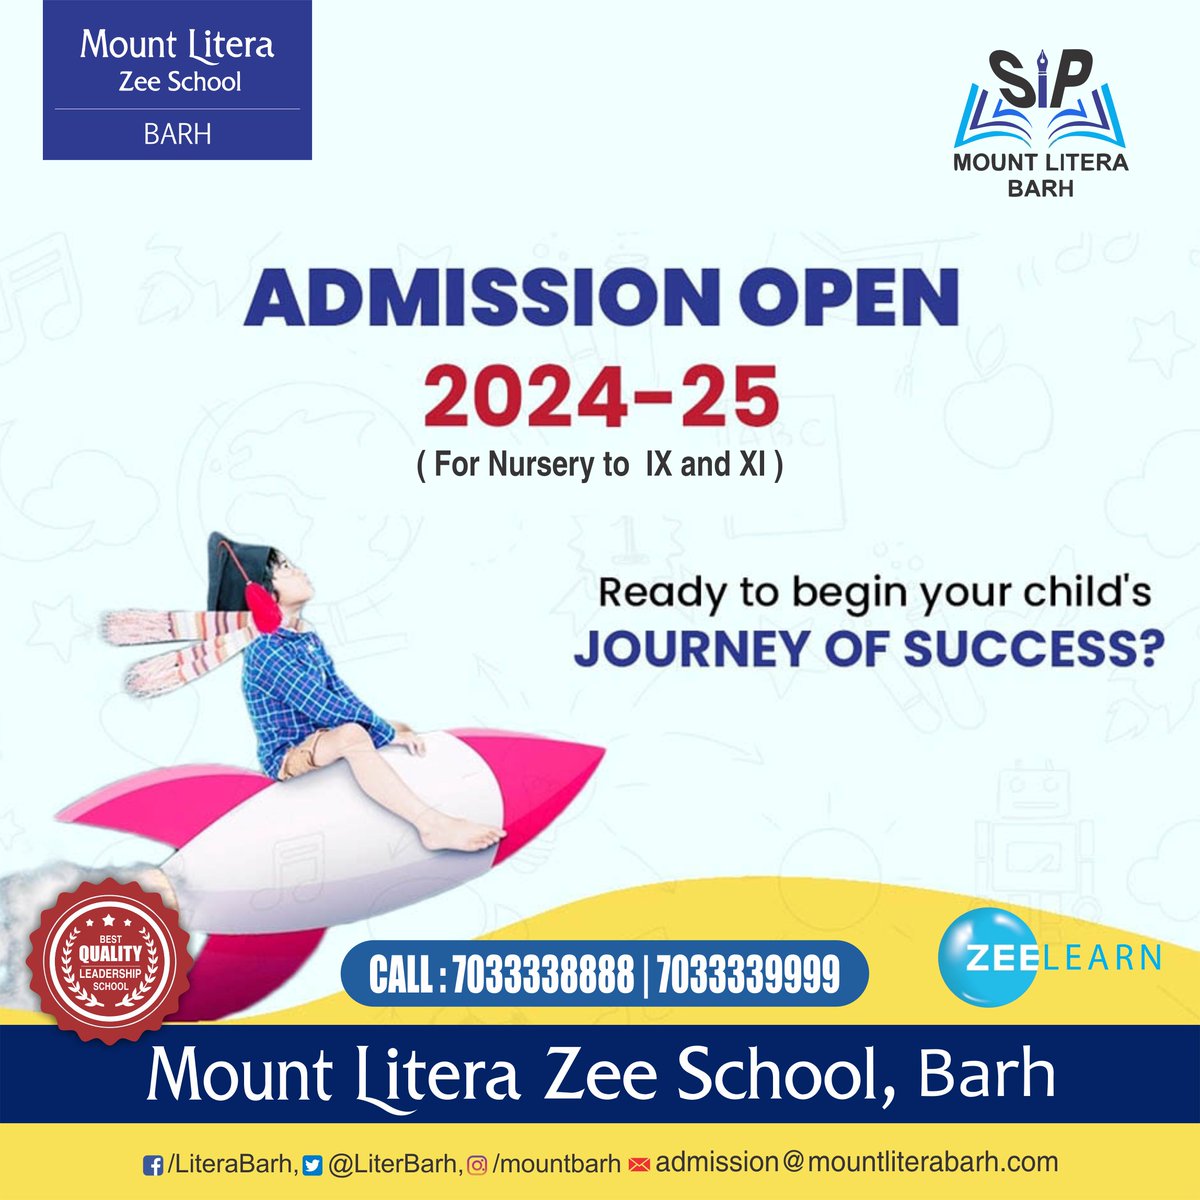 ✨✨𝐀𝐝𝐦𝐢𝐬𝐬𝐢𝐨𝐧𝐬 𝐎𝐩𝐞𝐧 𝐅𝐨𝐫 𝟐𝟎𝟐𝟒-𝟐𝟎𝟐𝟓 ✨✨ Choose Mount Litera Zee School Barh for your child's bright future. Grab your chance to study in one of the best school chains in the country.